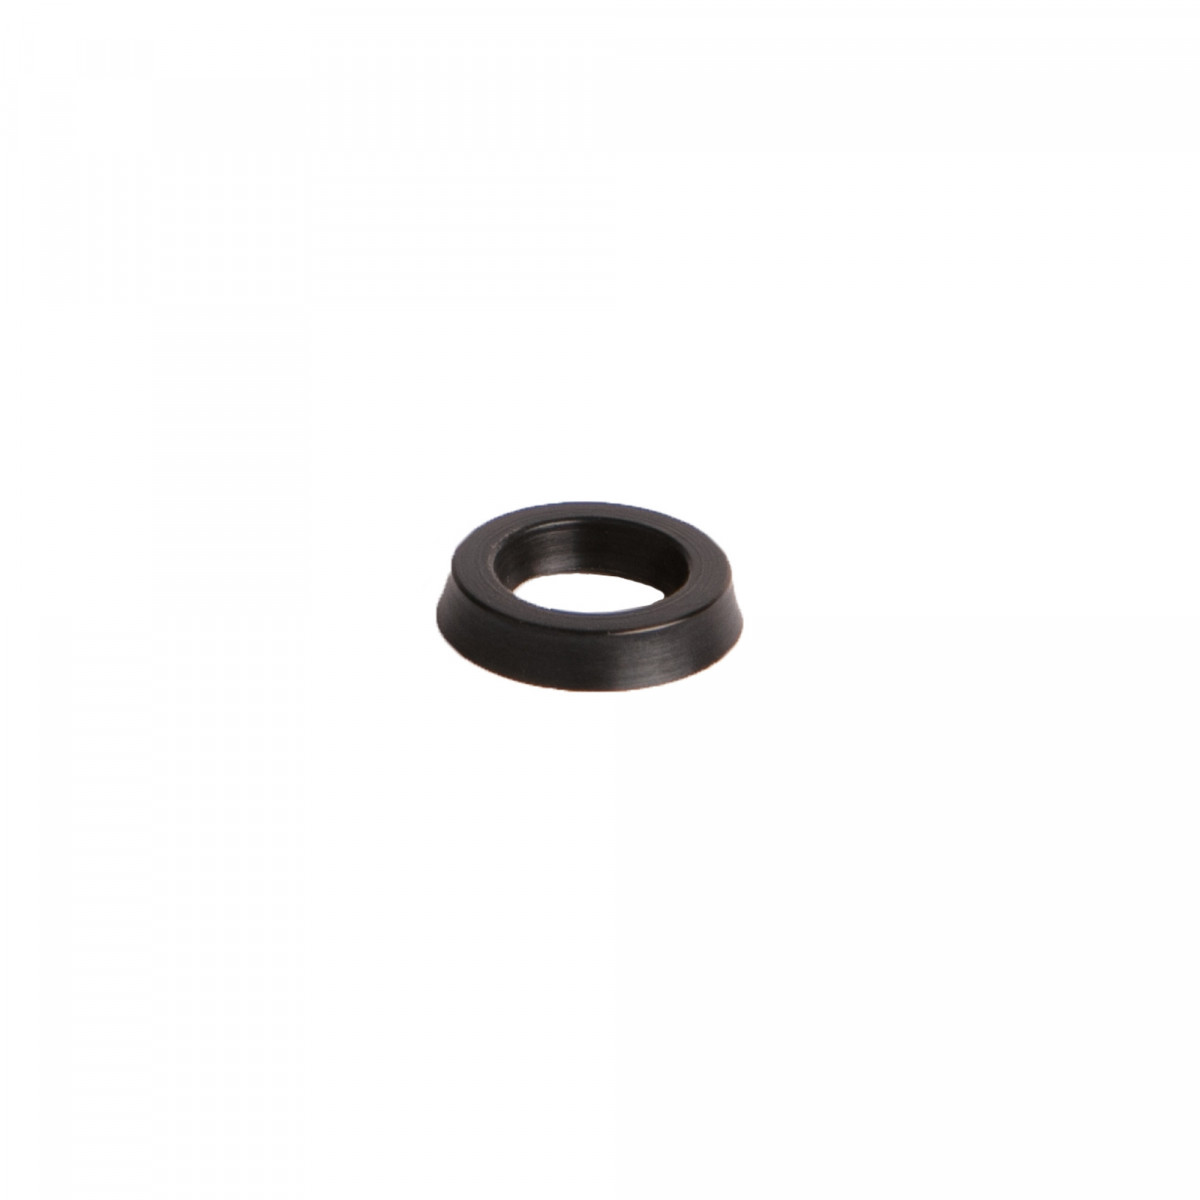 Axial rubber 043 for filling head 16 mm